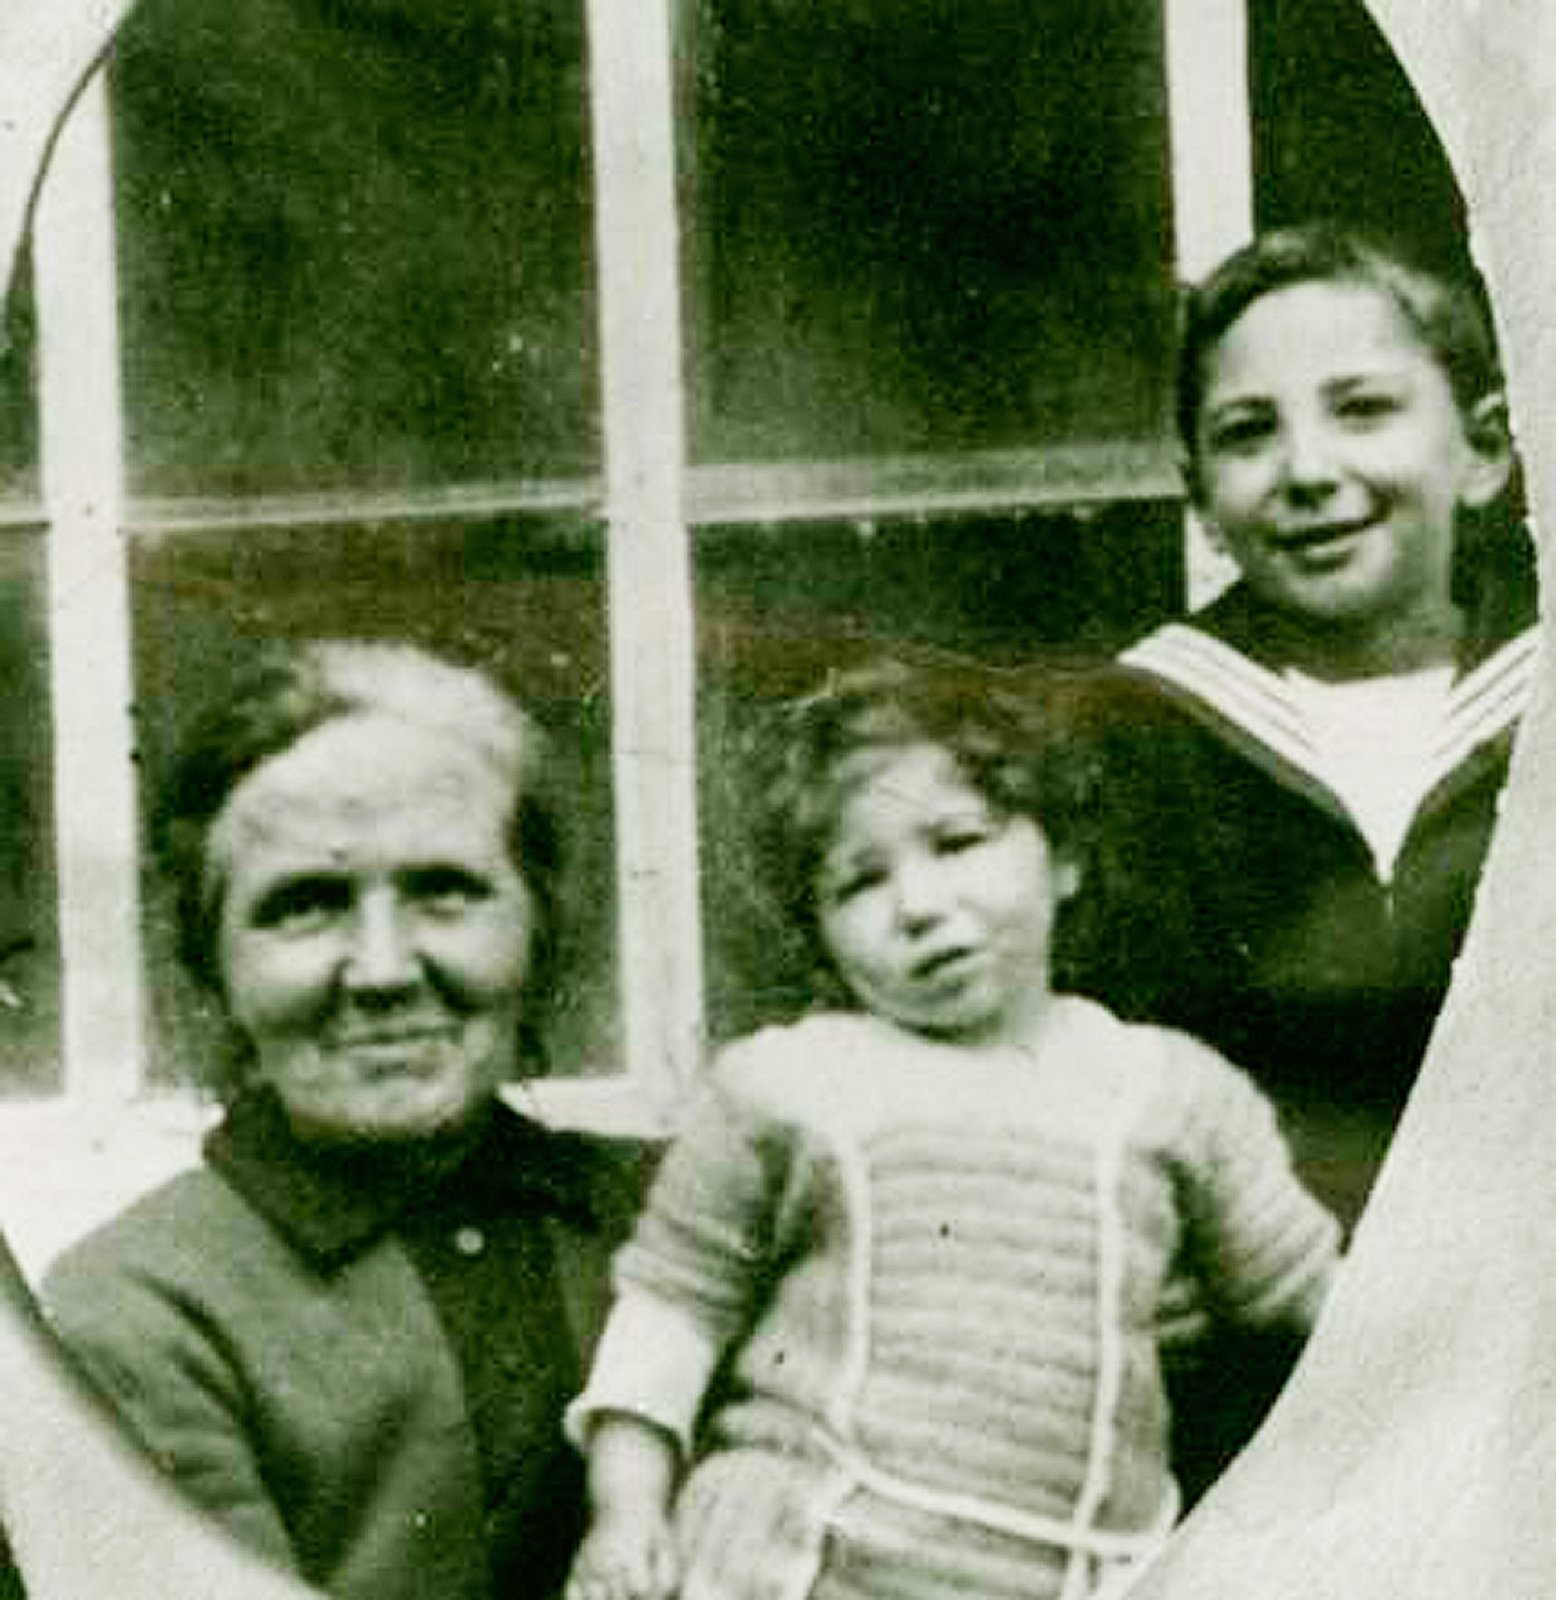 Marianne (center) and Manfred Bernheim (right) with their nanny.